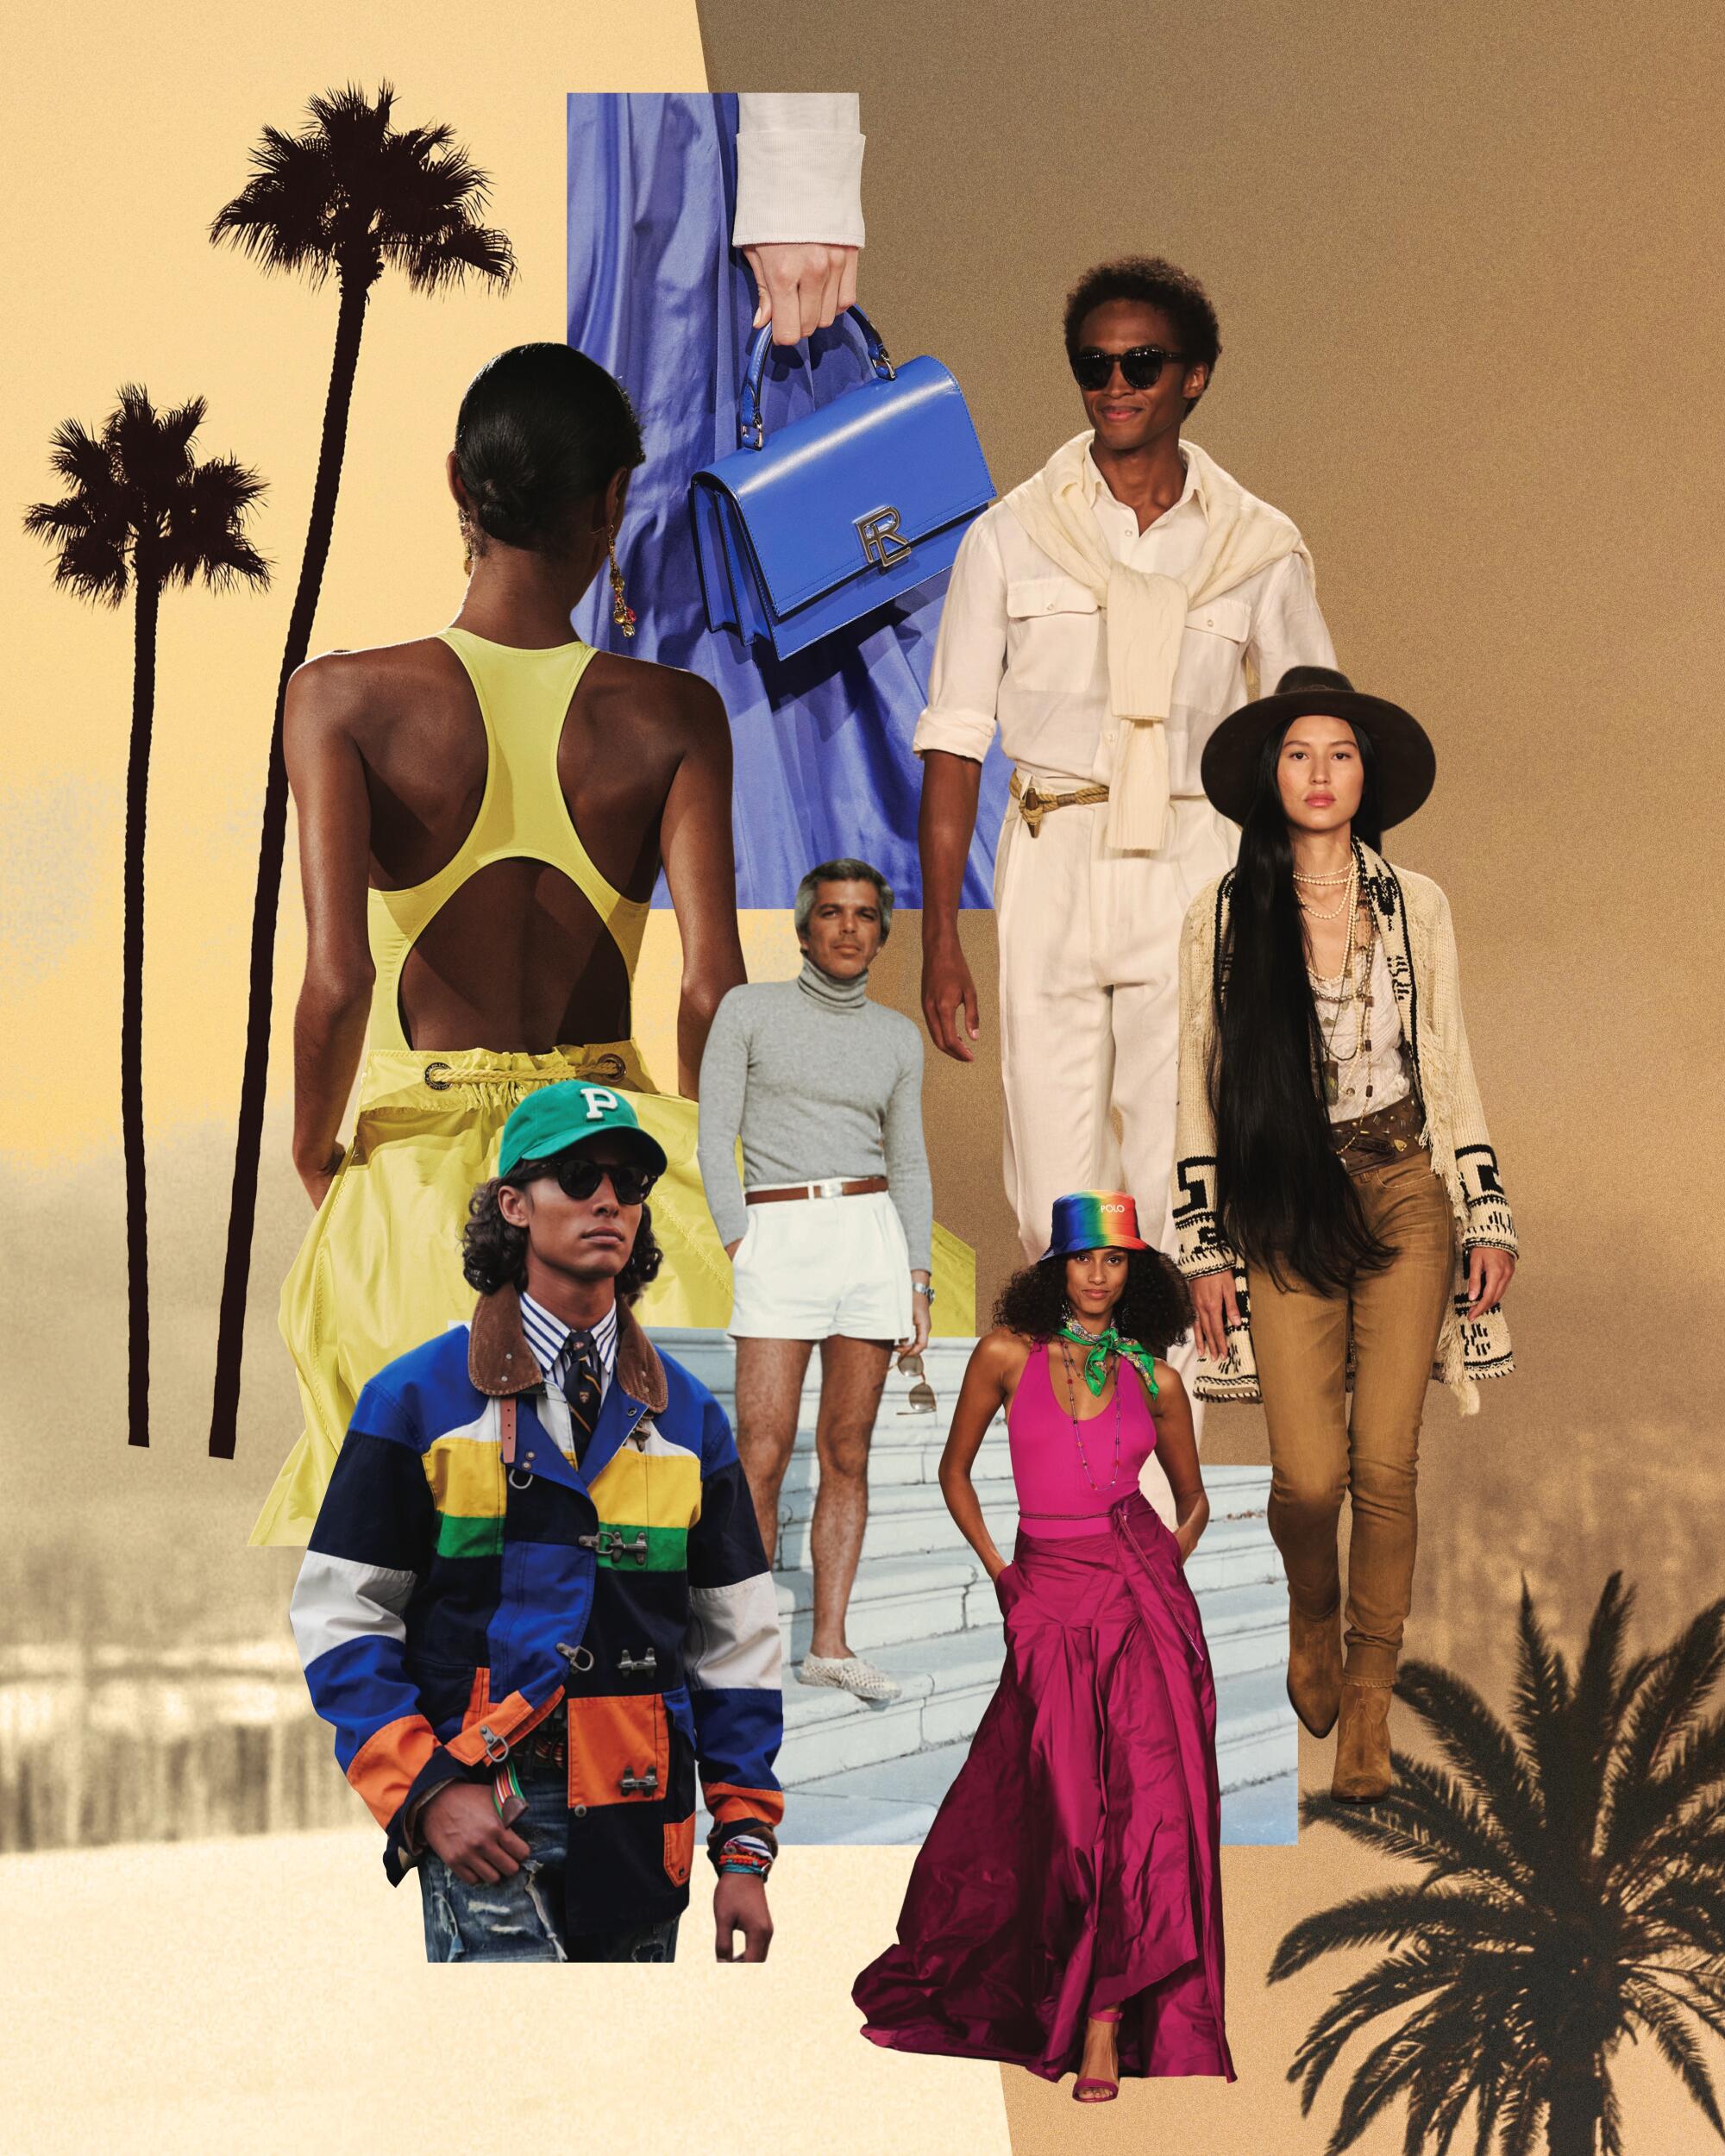 The World of Ralph Lauren Brought to Life